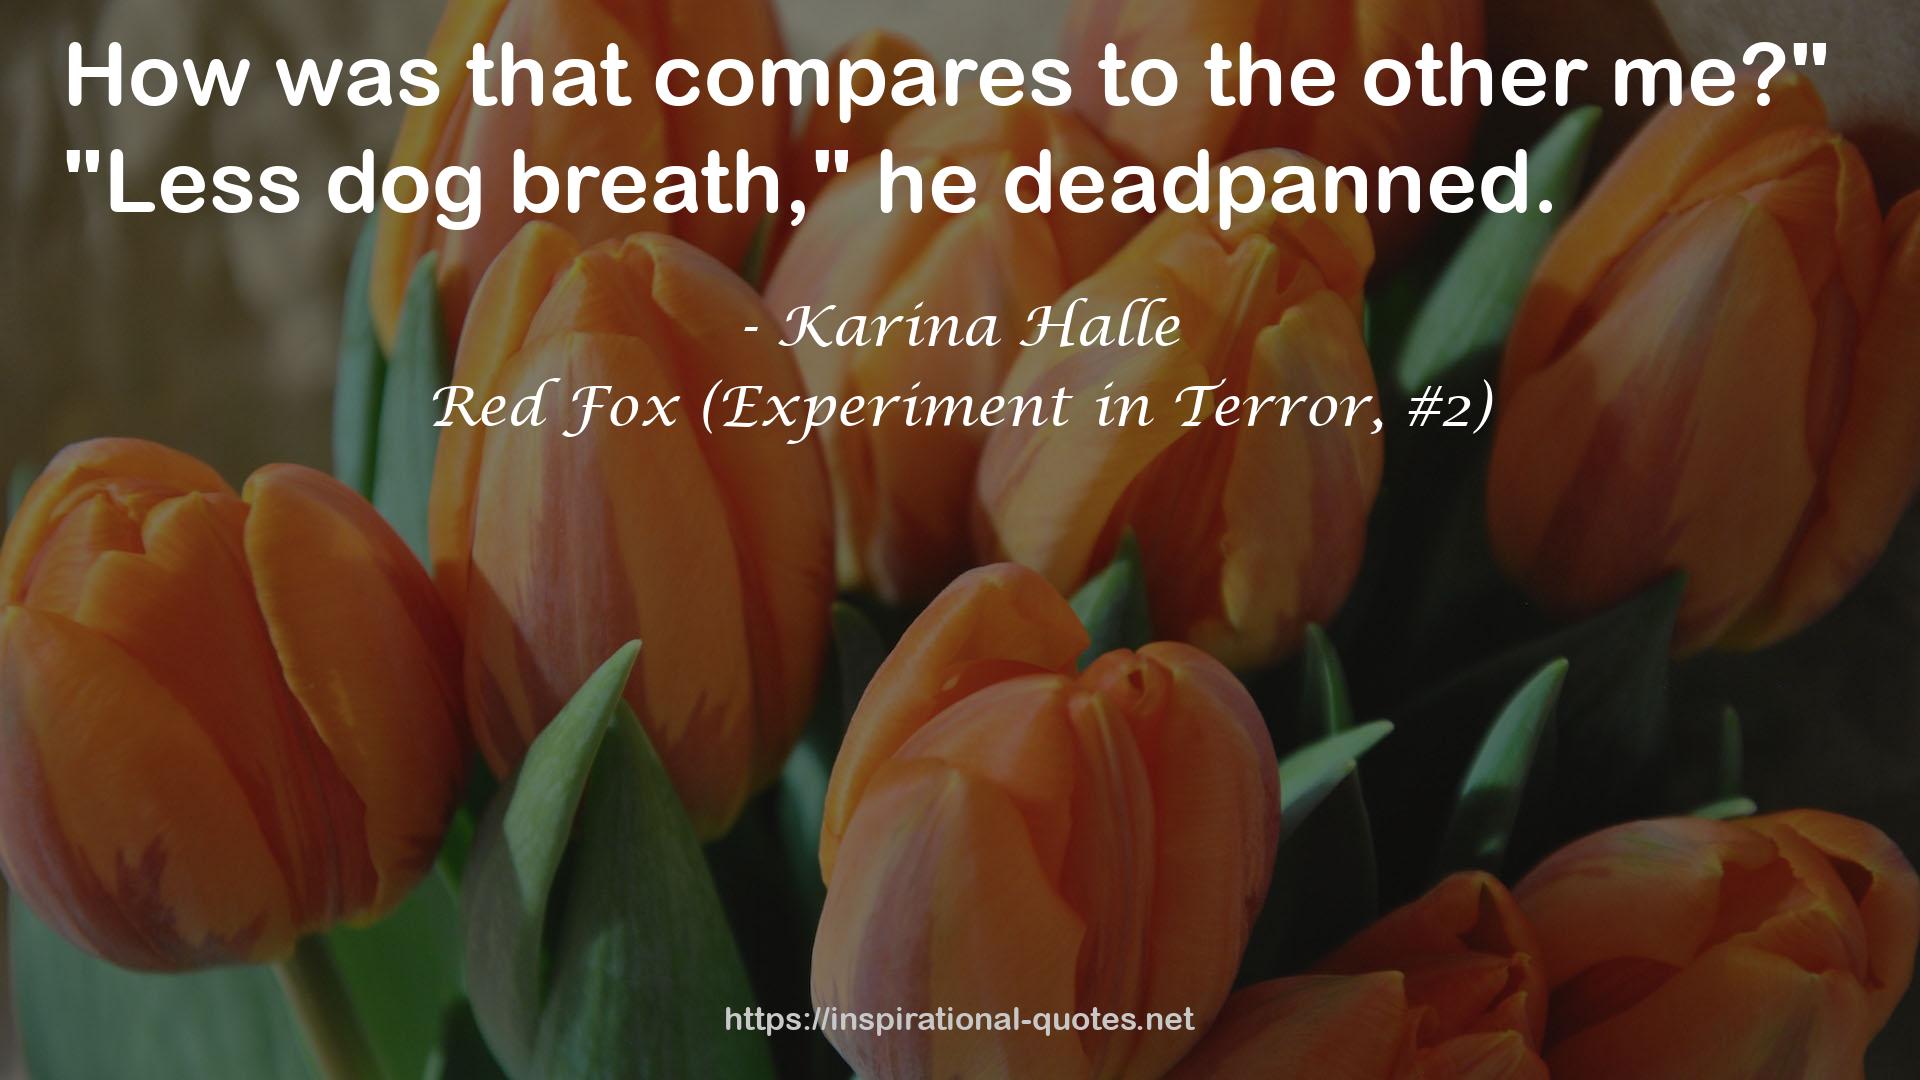 Red Fox (Experiment in Terror, #2) QUOTES